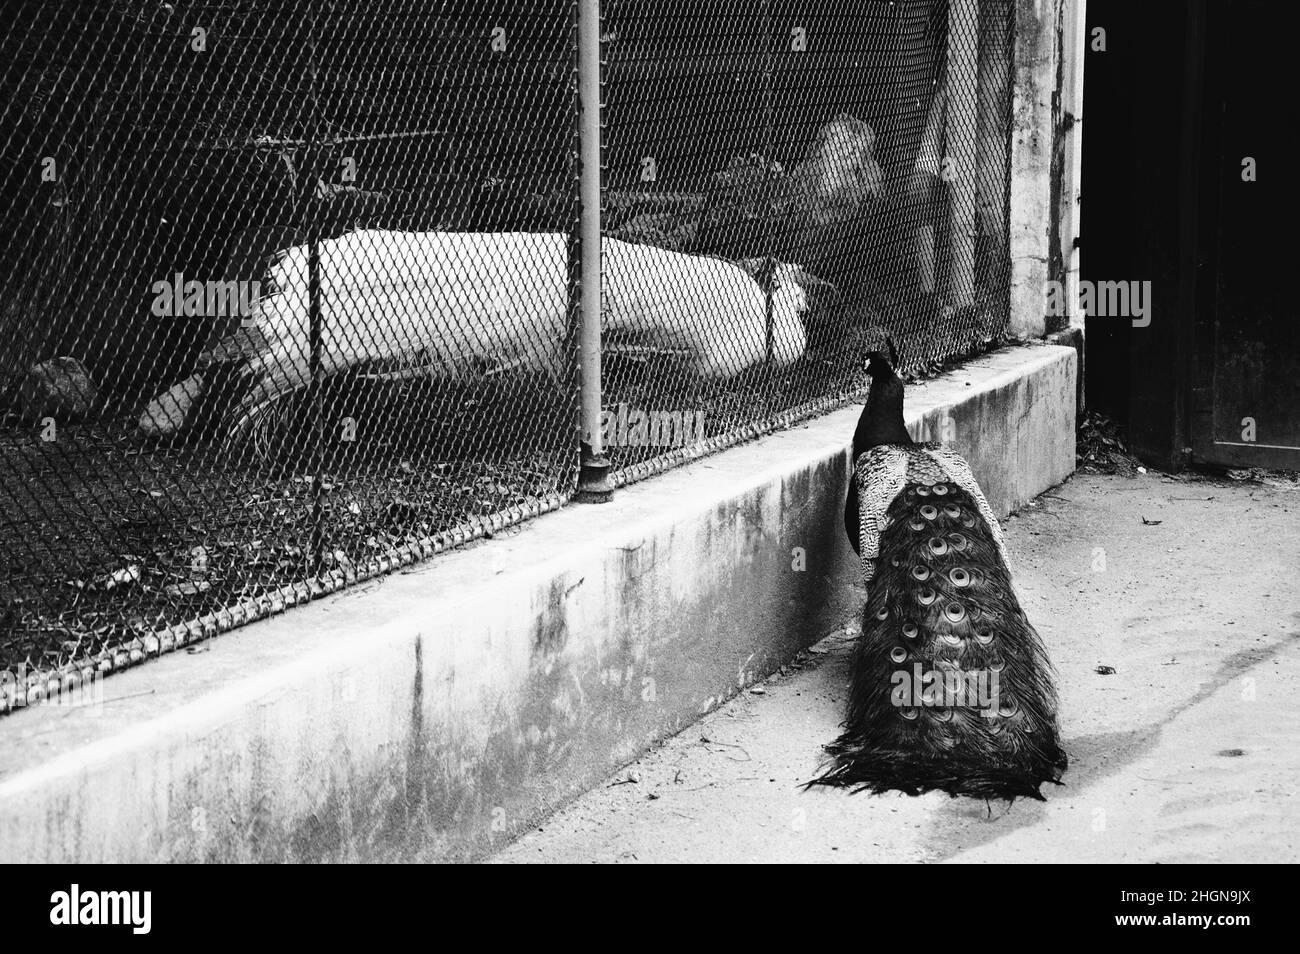 Difficult love. Free colorful peacock courting white one sitting in aviary. Black  white historic photo. Stock Photo